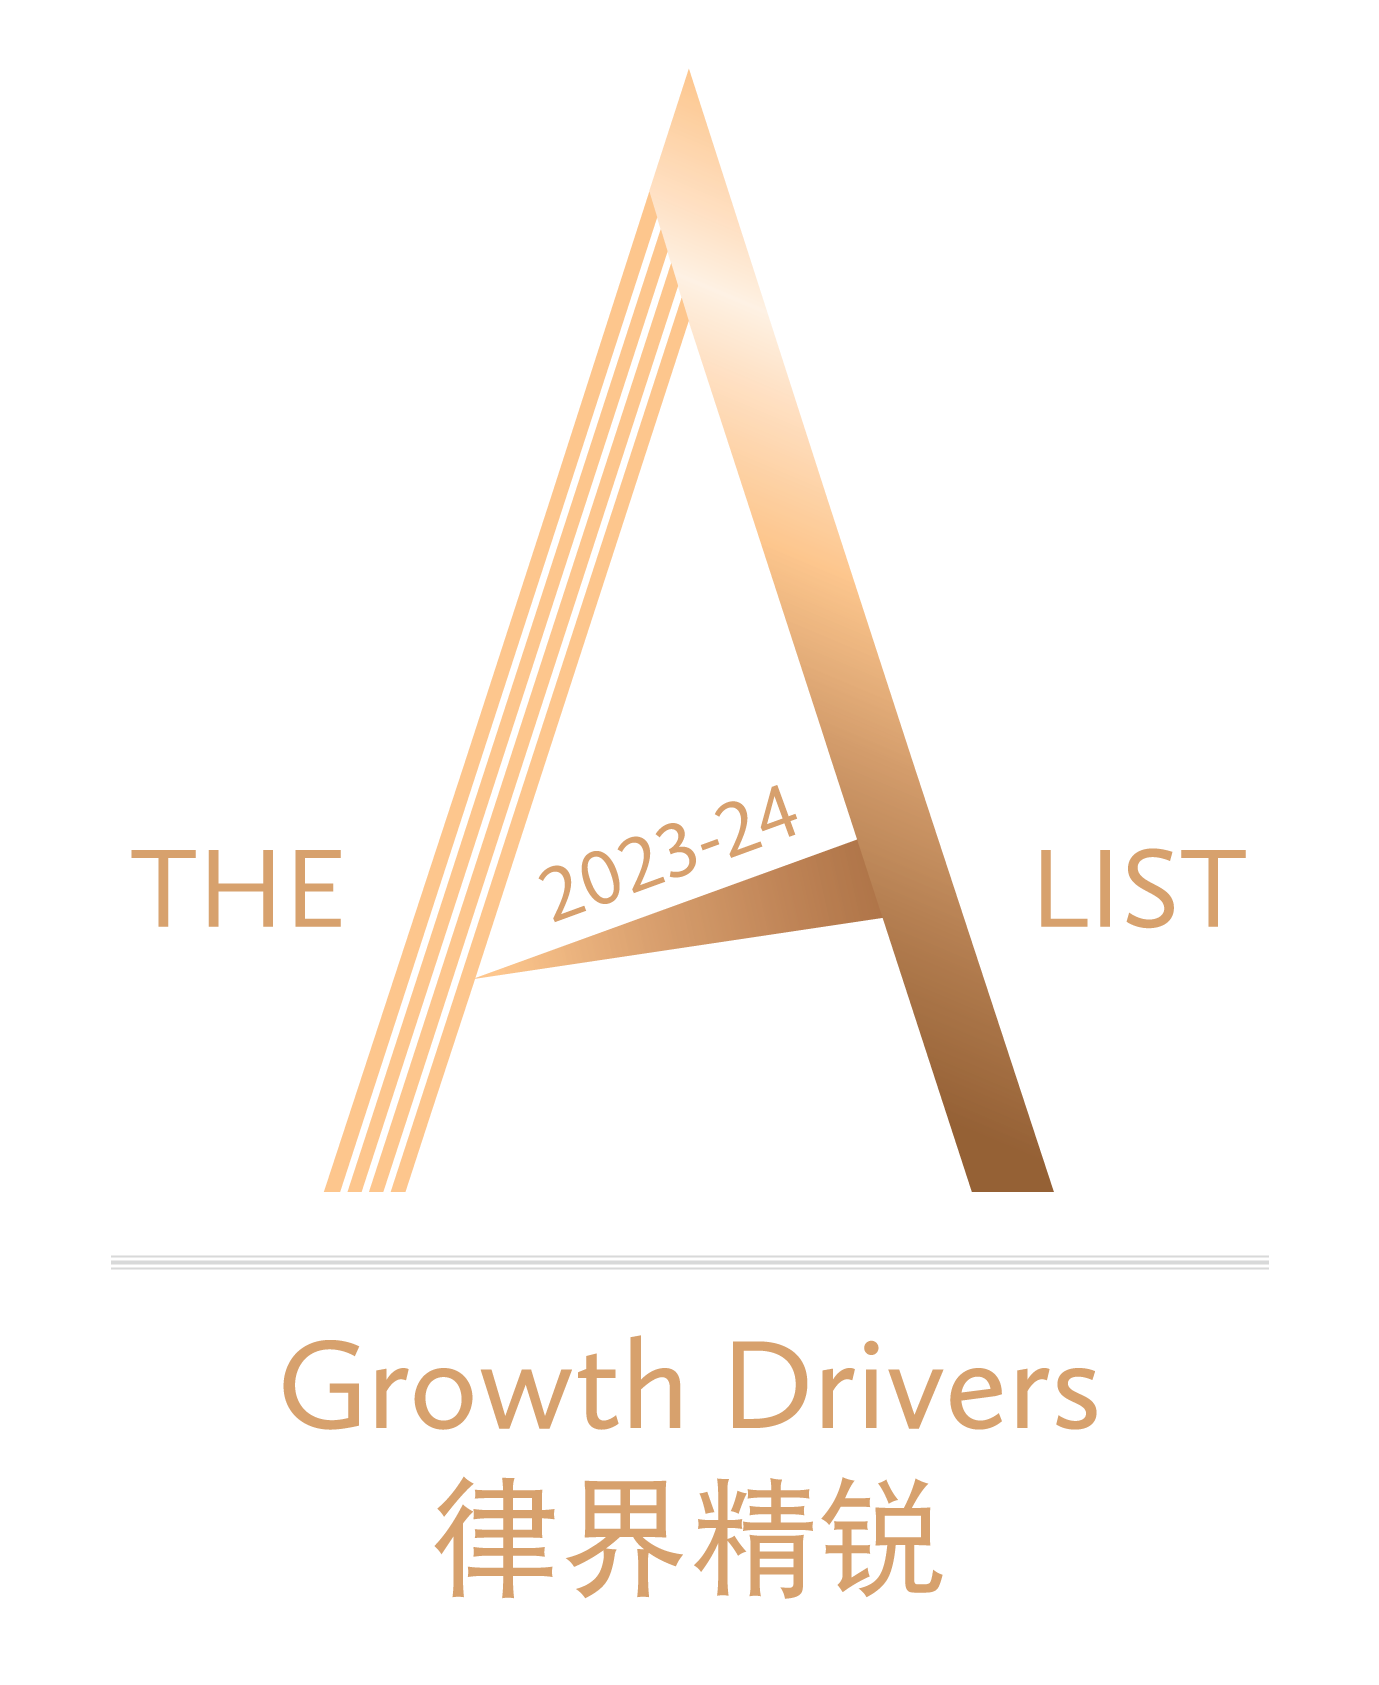 China Business Law Journal The A-List Visionaries2023